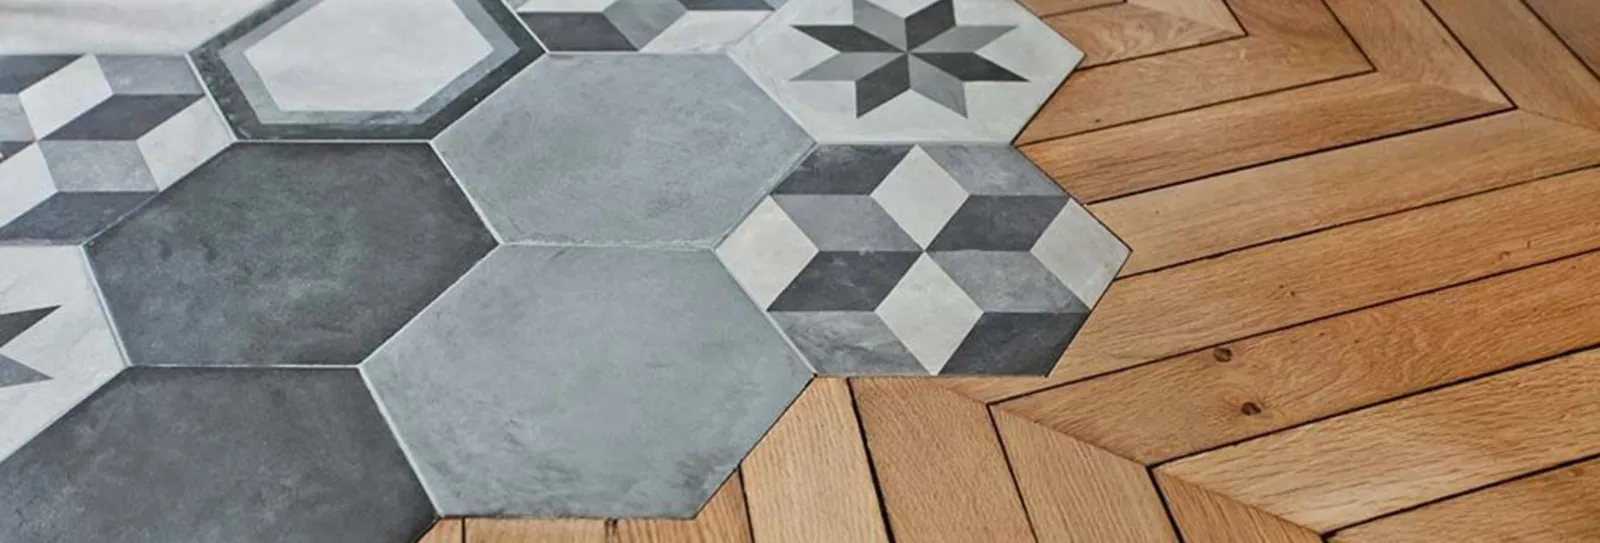 Flooring Ideas That Will Rule Supreme In 2022 | Groysman Construction Remodeling | 8